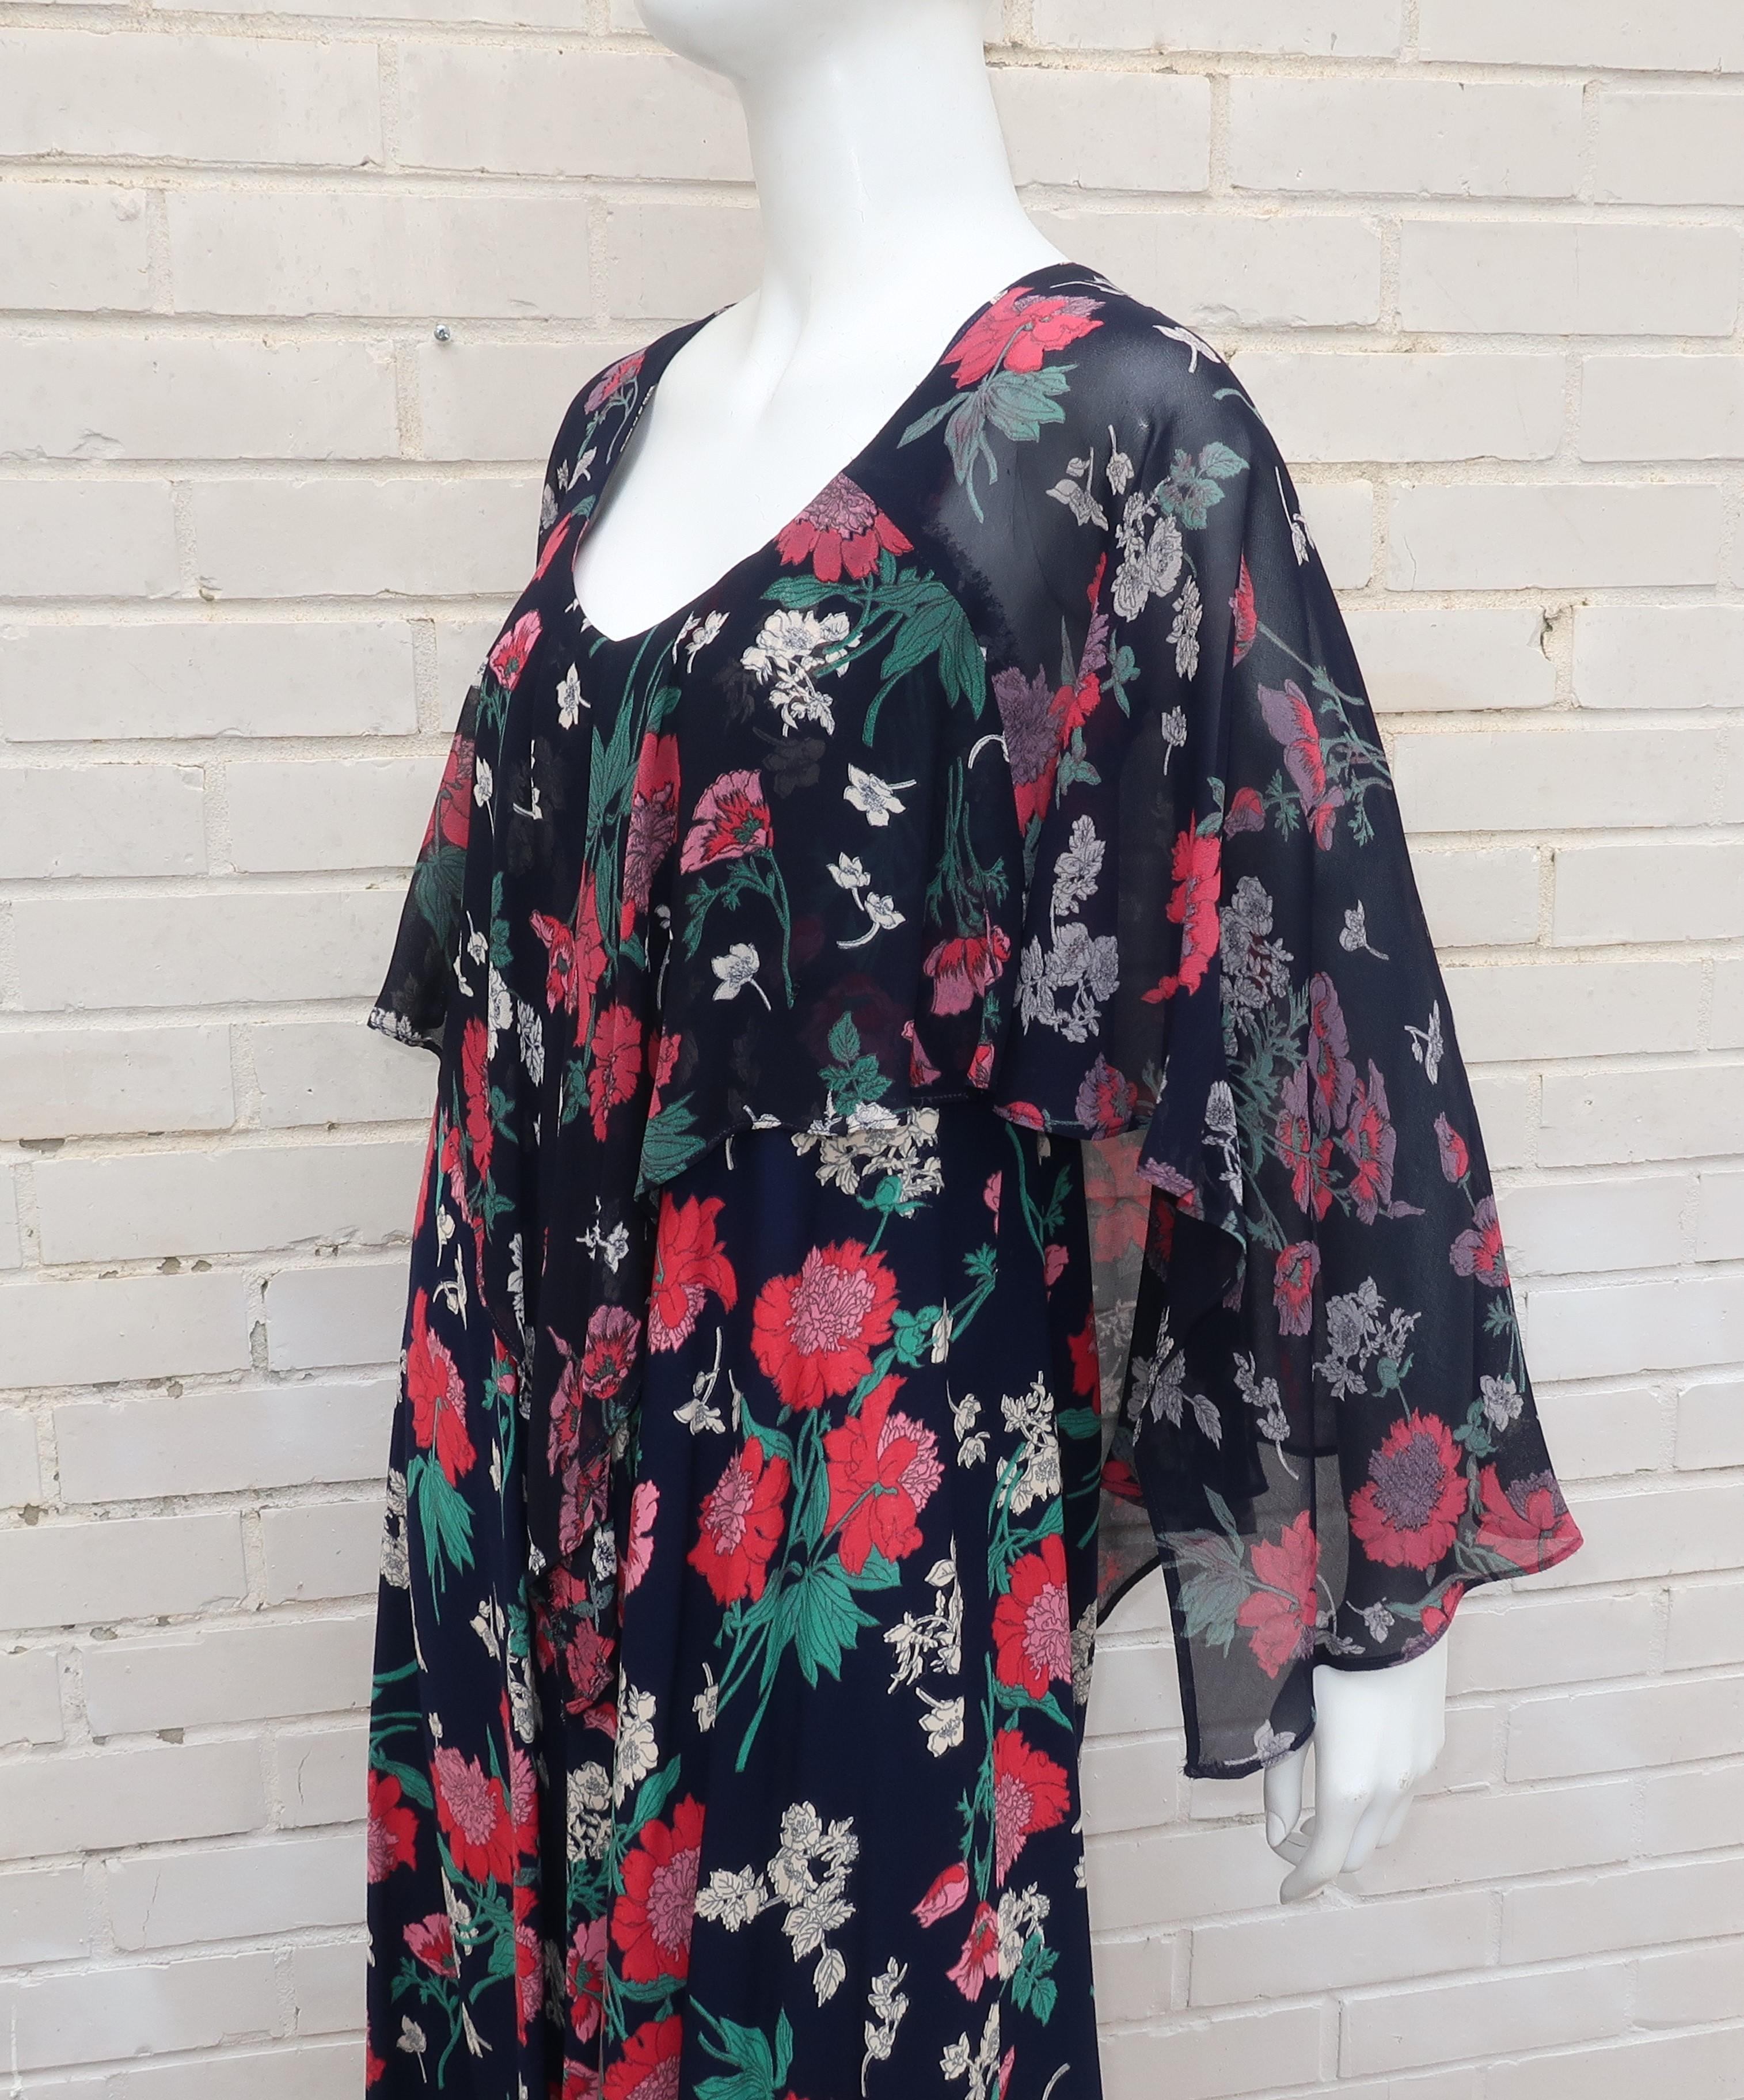 Early Nicole Miller 1970's Floral Bohemian Dress With Overlay  4